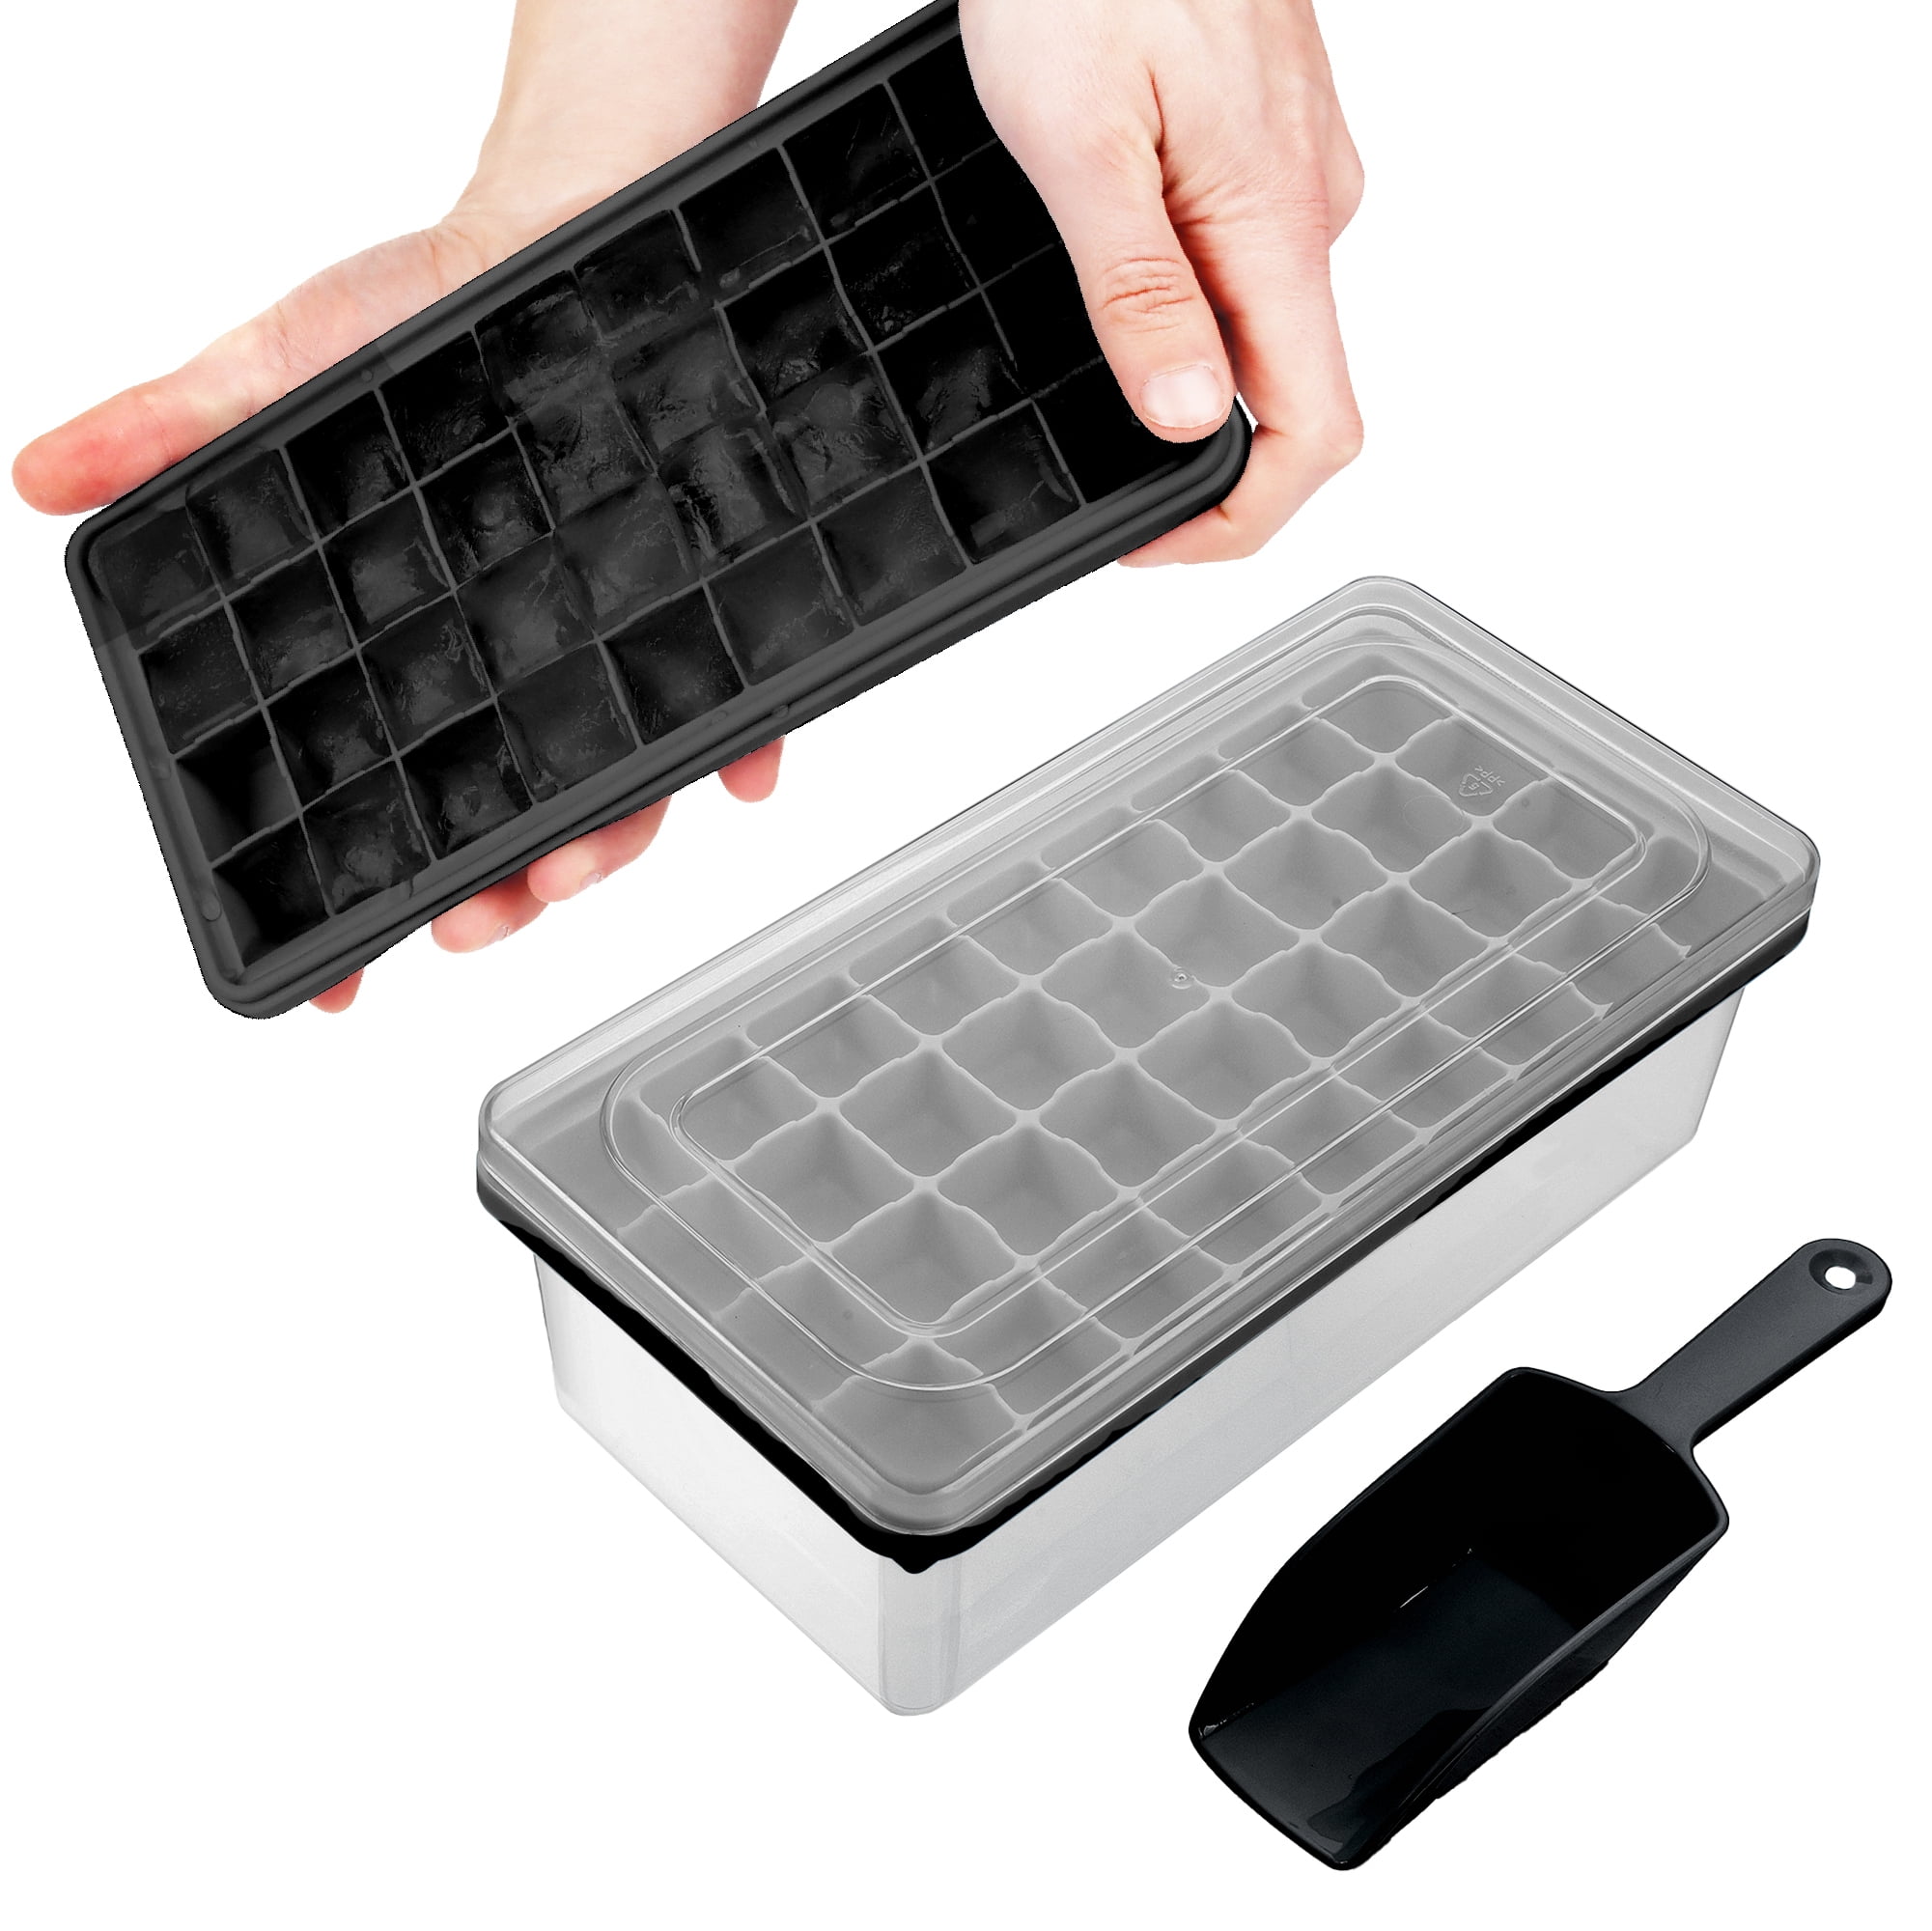 Lustroware Covered Ice Tray with Storage Bin, Set of 3 - Macy's